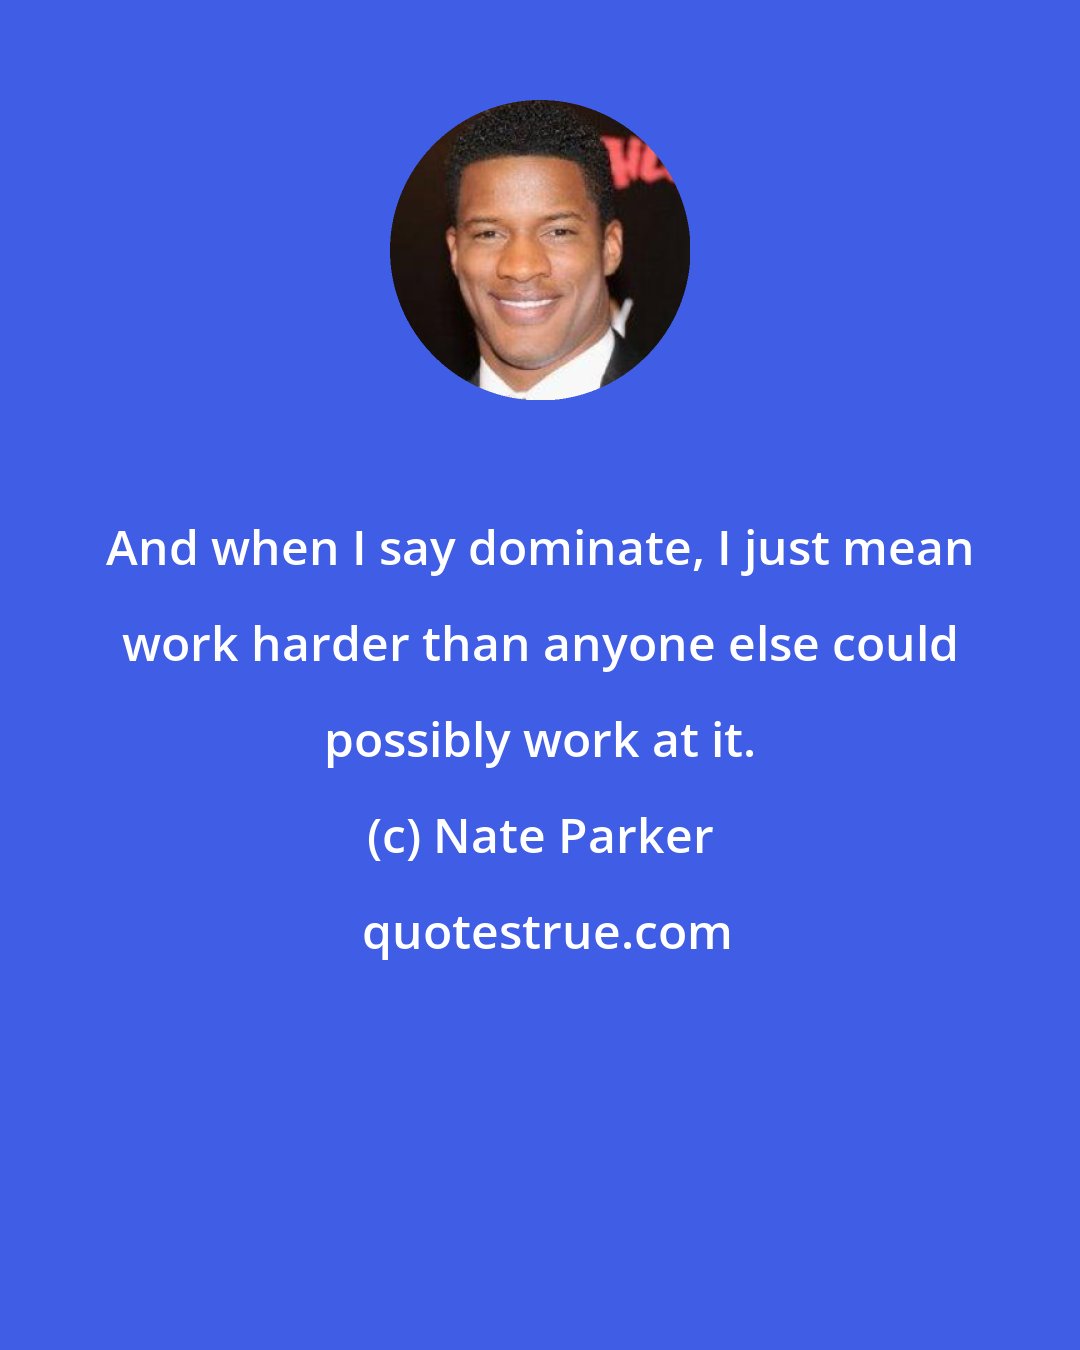 Nate Parker: And when I say dominate, I just mean work harder than anyone else could possibly work at it.